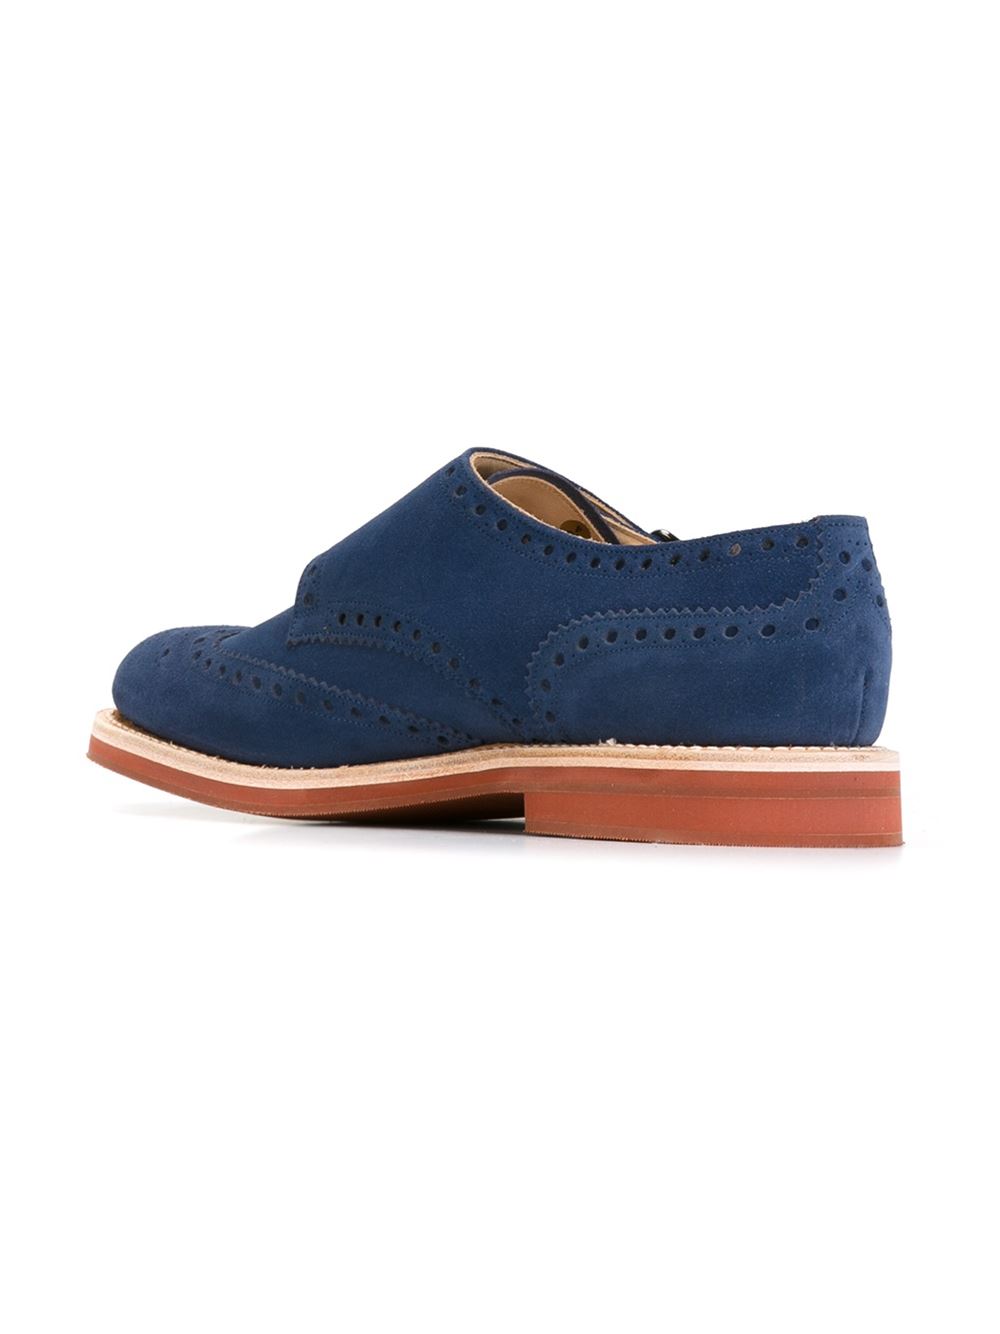 Blue On The Horizon: Church's Giulio Perforated Buckle Shoe | SHOEOGRAPHY